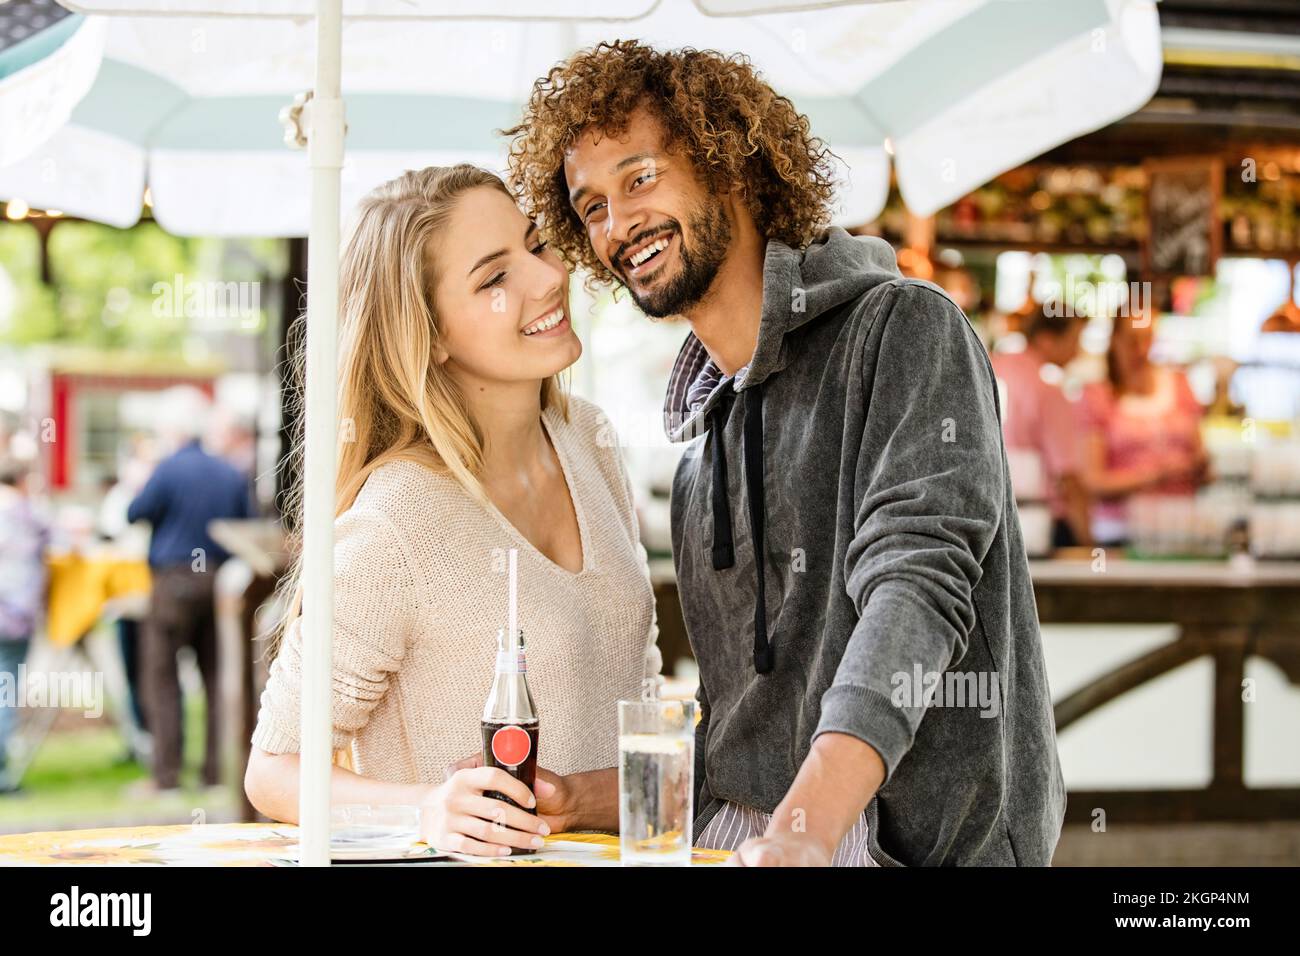 Young couple drinking beverage at a fun fair food stand Stock Photo